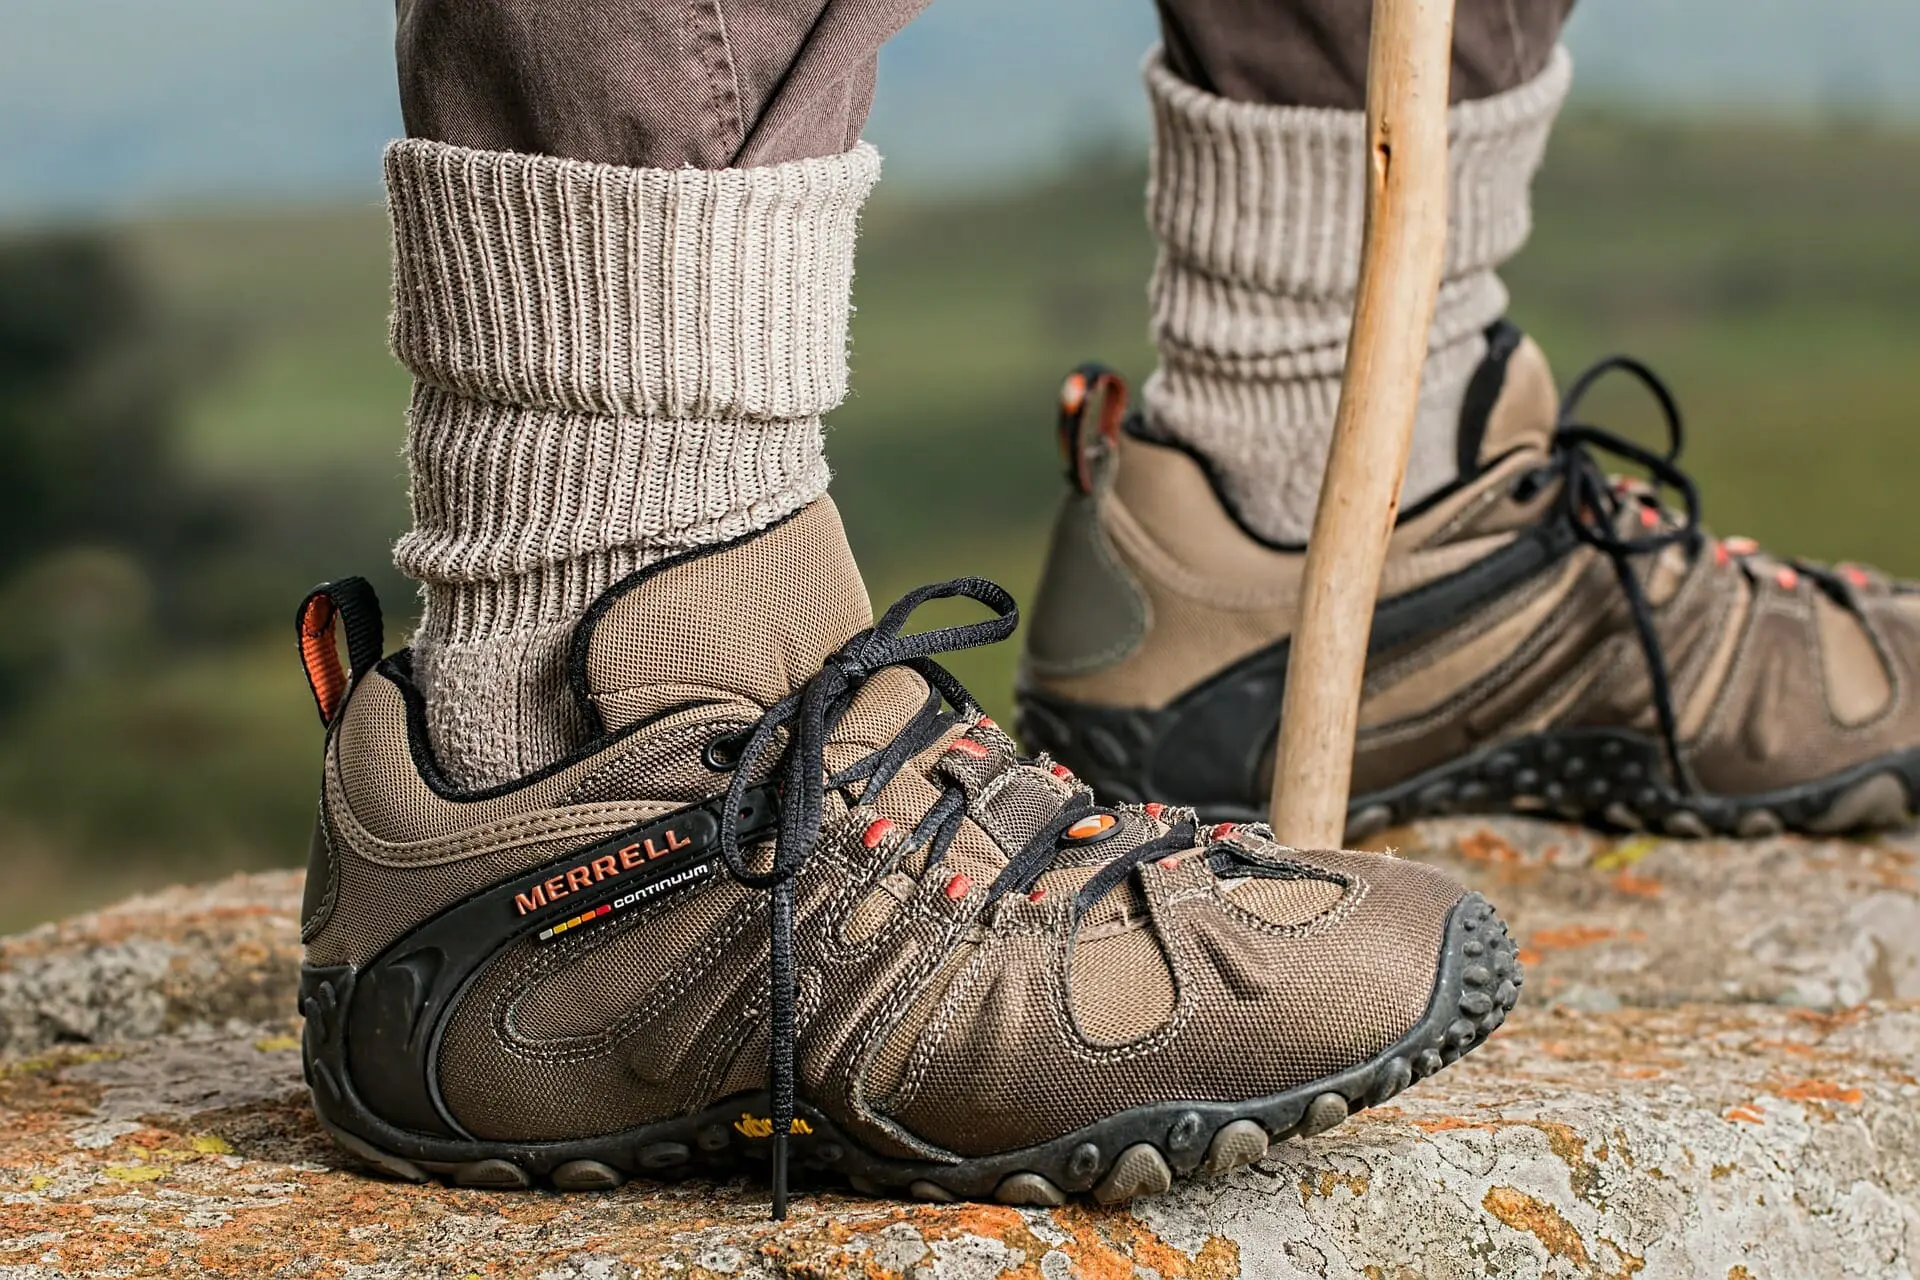 Mid-Size hiking shoes